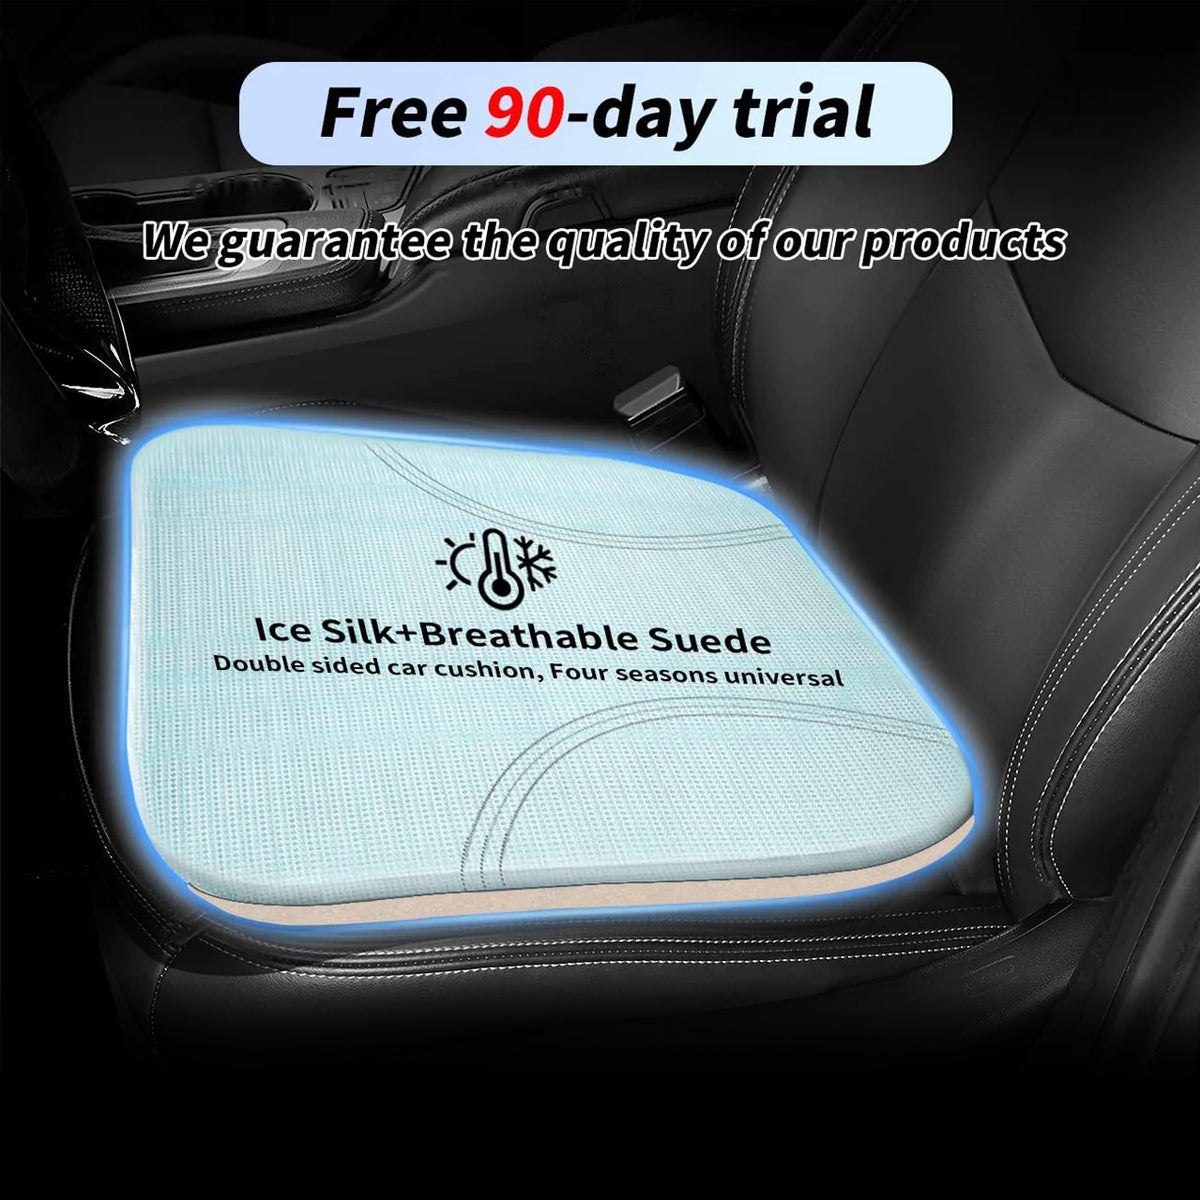 Delicate Leather Car Seat Cushion, Custom For Cars, Car Memory Foam Seat Cushion, Heightening Seat Cushion, Seat Cushion for Car and Office Chair TY19999 - Delicate Leather